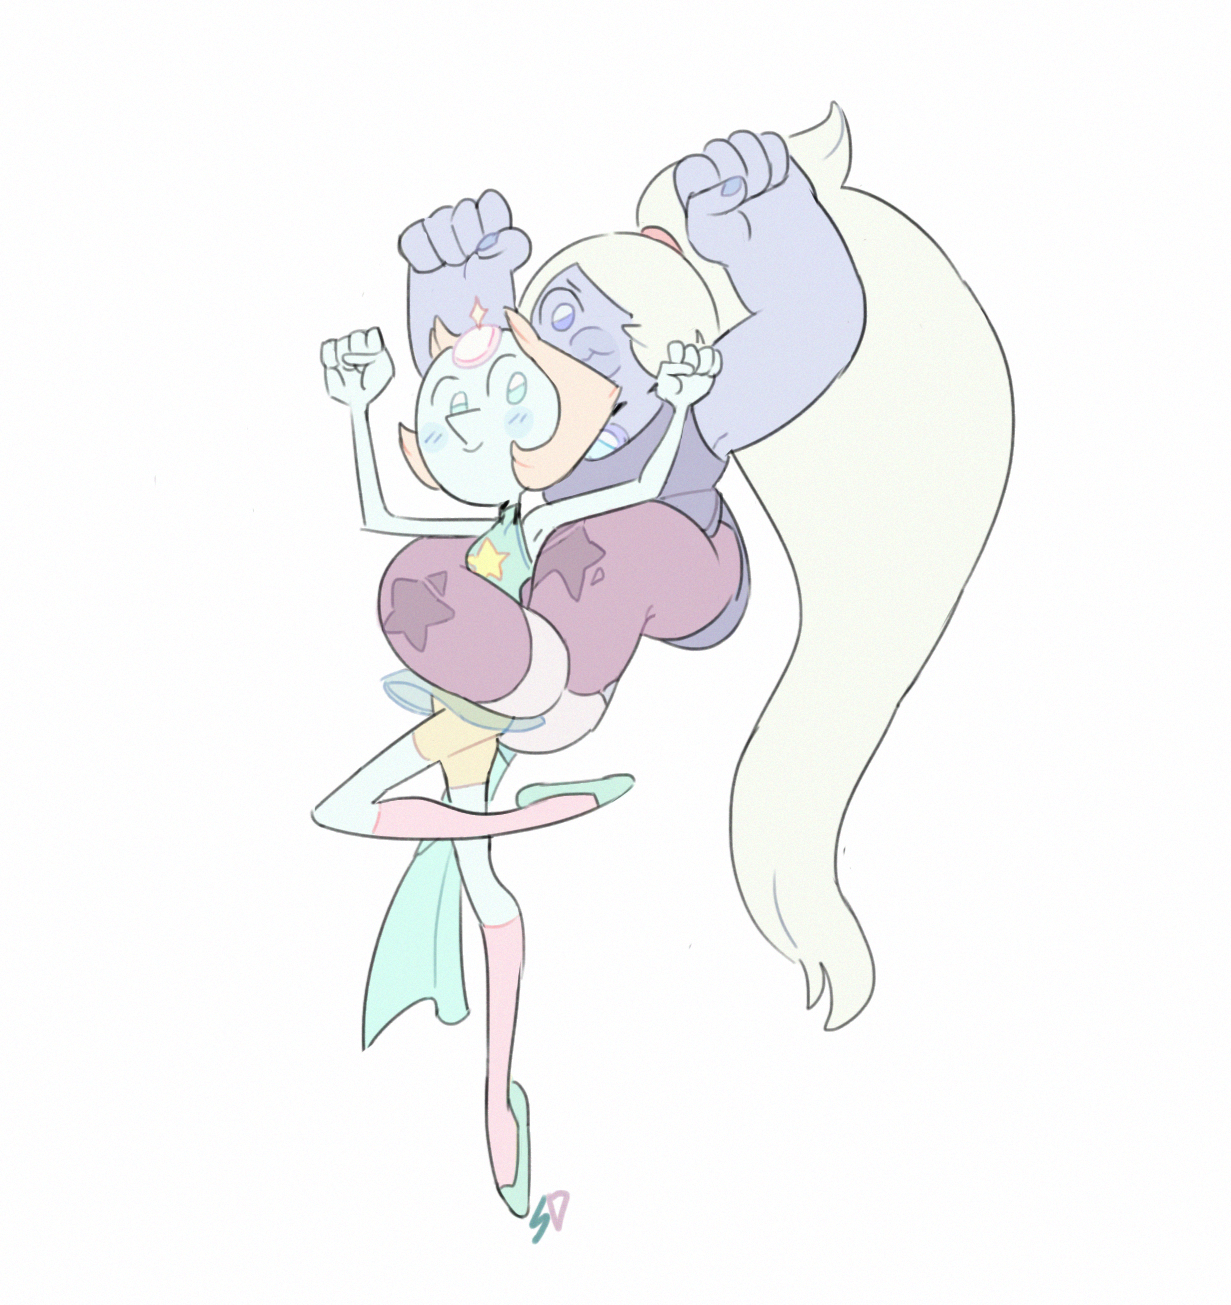 “another Opal!”